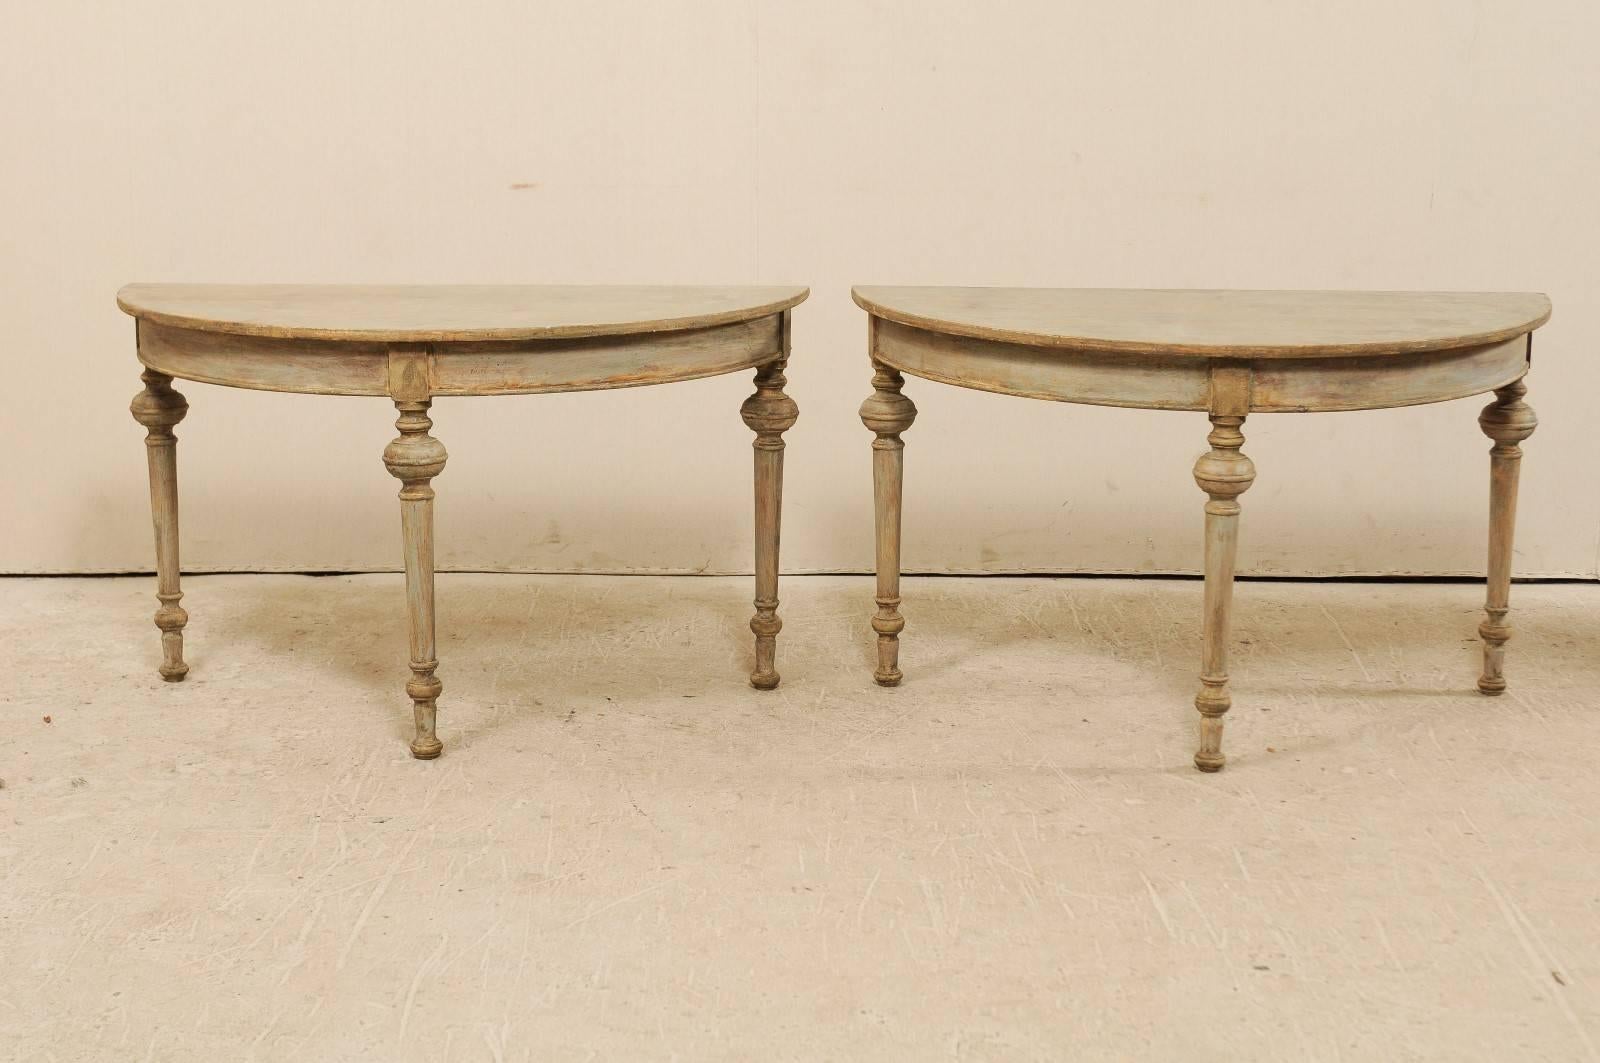 19th Century Pair of Swedish Painted Wood Demi Lune Tables with Round Turned and Tapered Legs